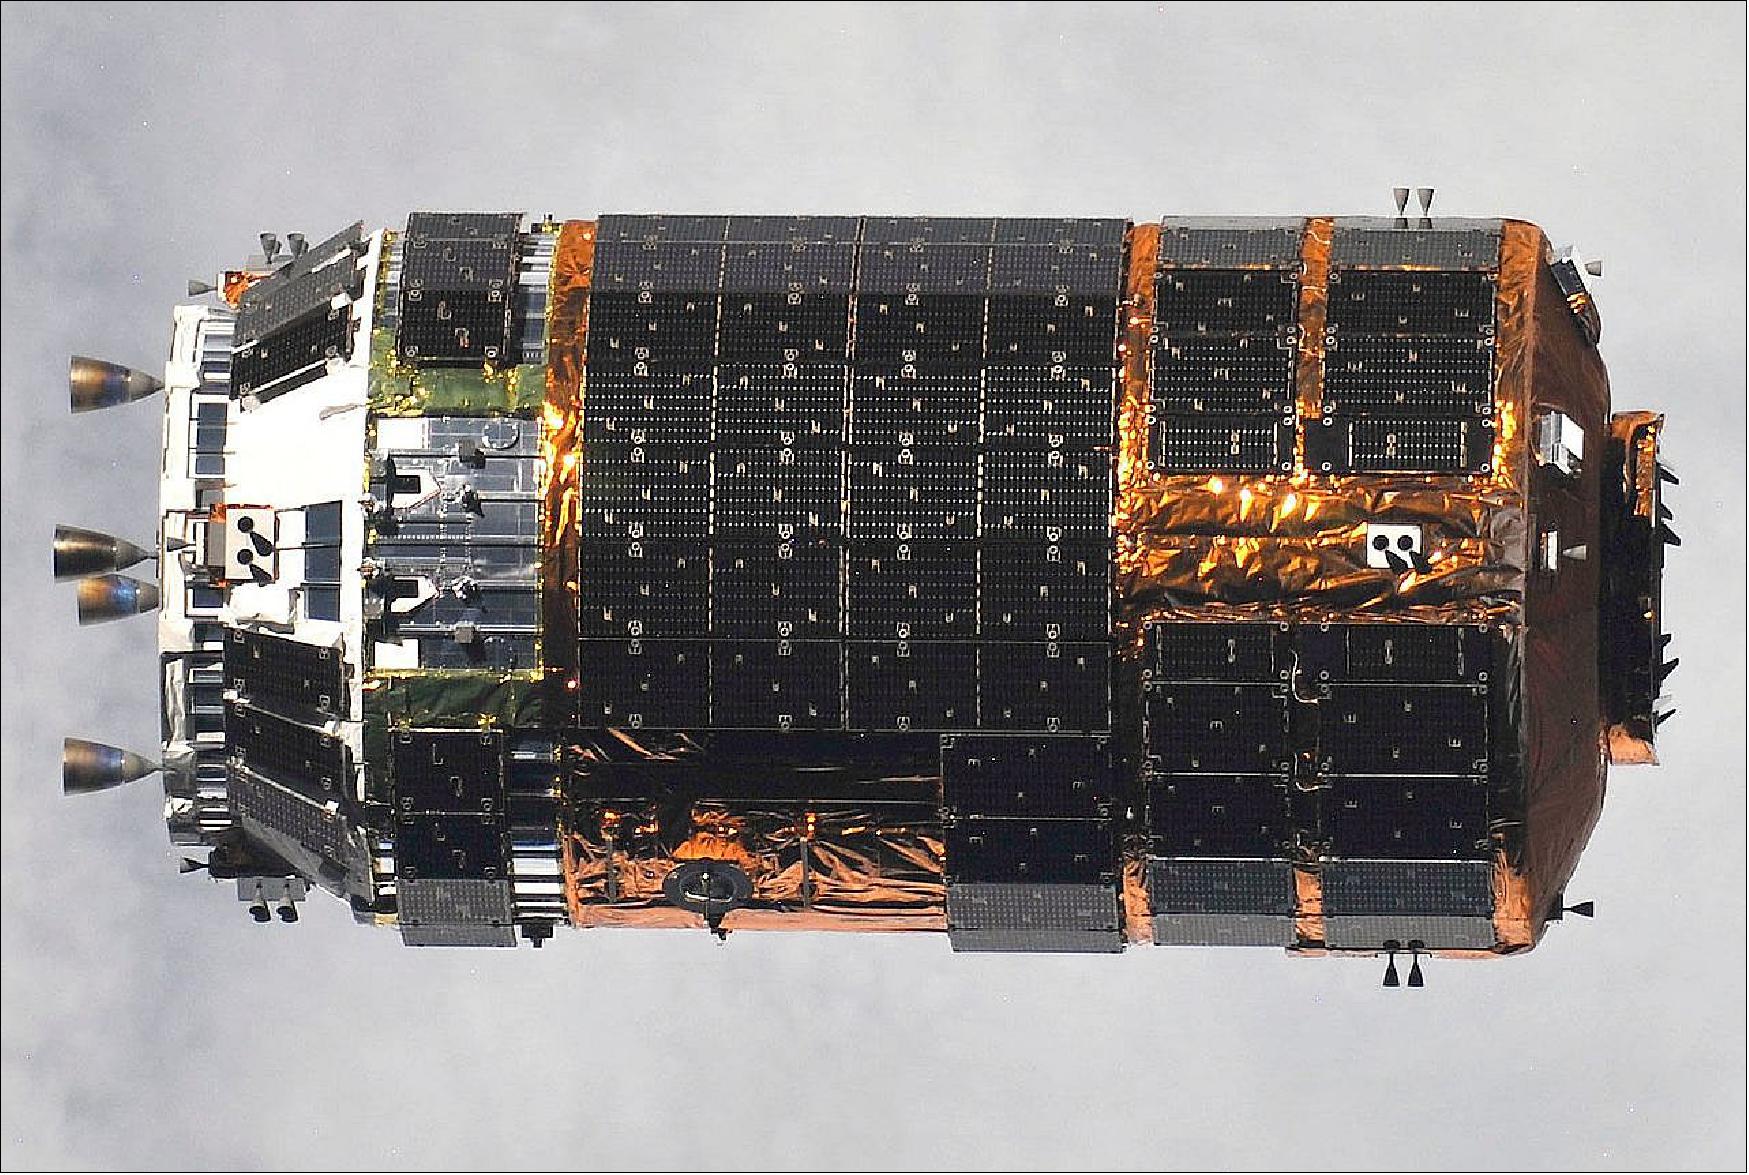 Figure 1: Illustration of the HTV-9/Kounotori-9 vehicle in flight with a payload mass of 6200 kg and a size of 9.8 m long by 4.4 m in diameter (image credit: JAXA)